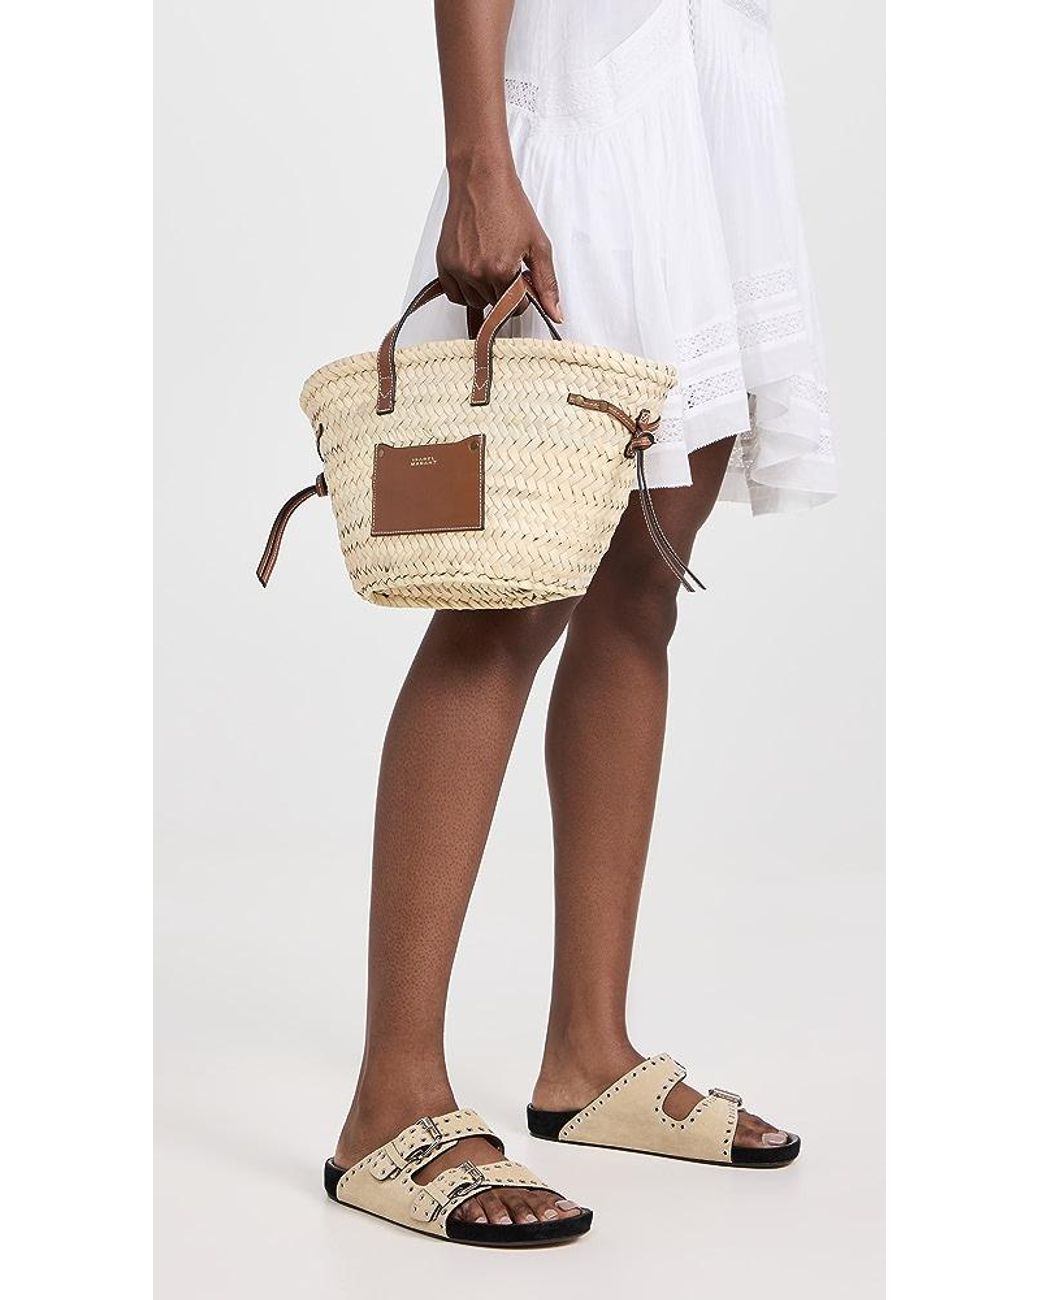 Cadix Straw & Leather Tote Bag